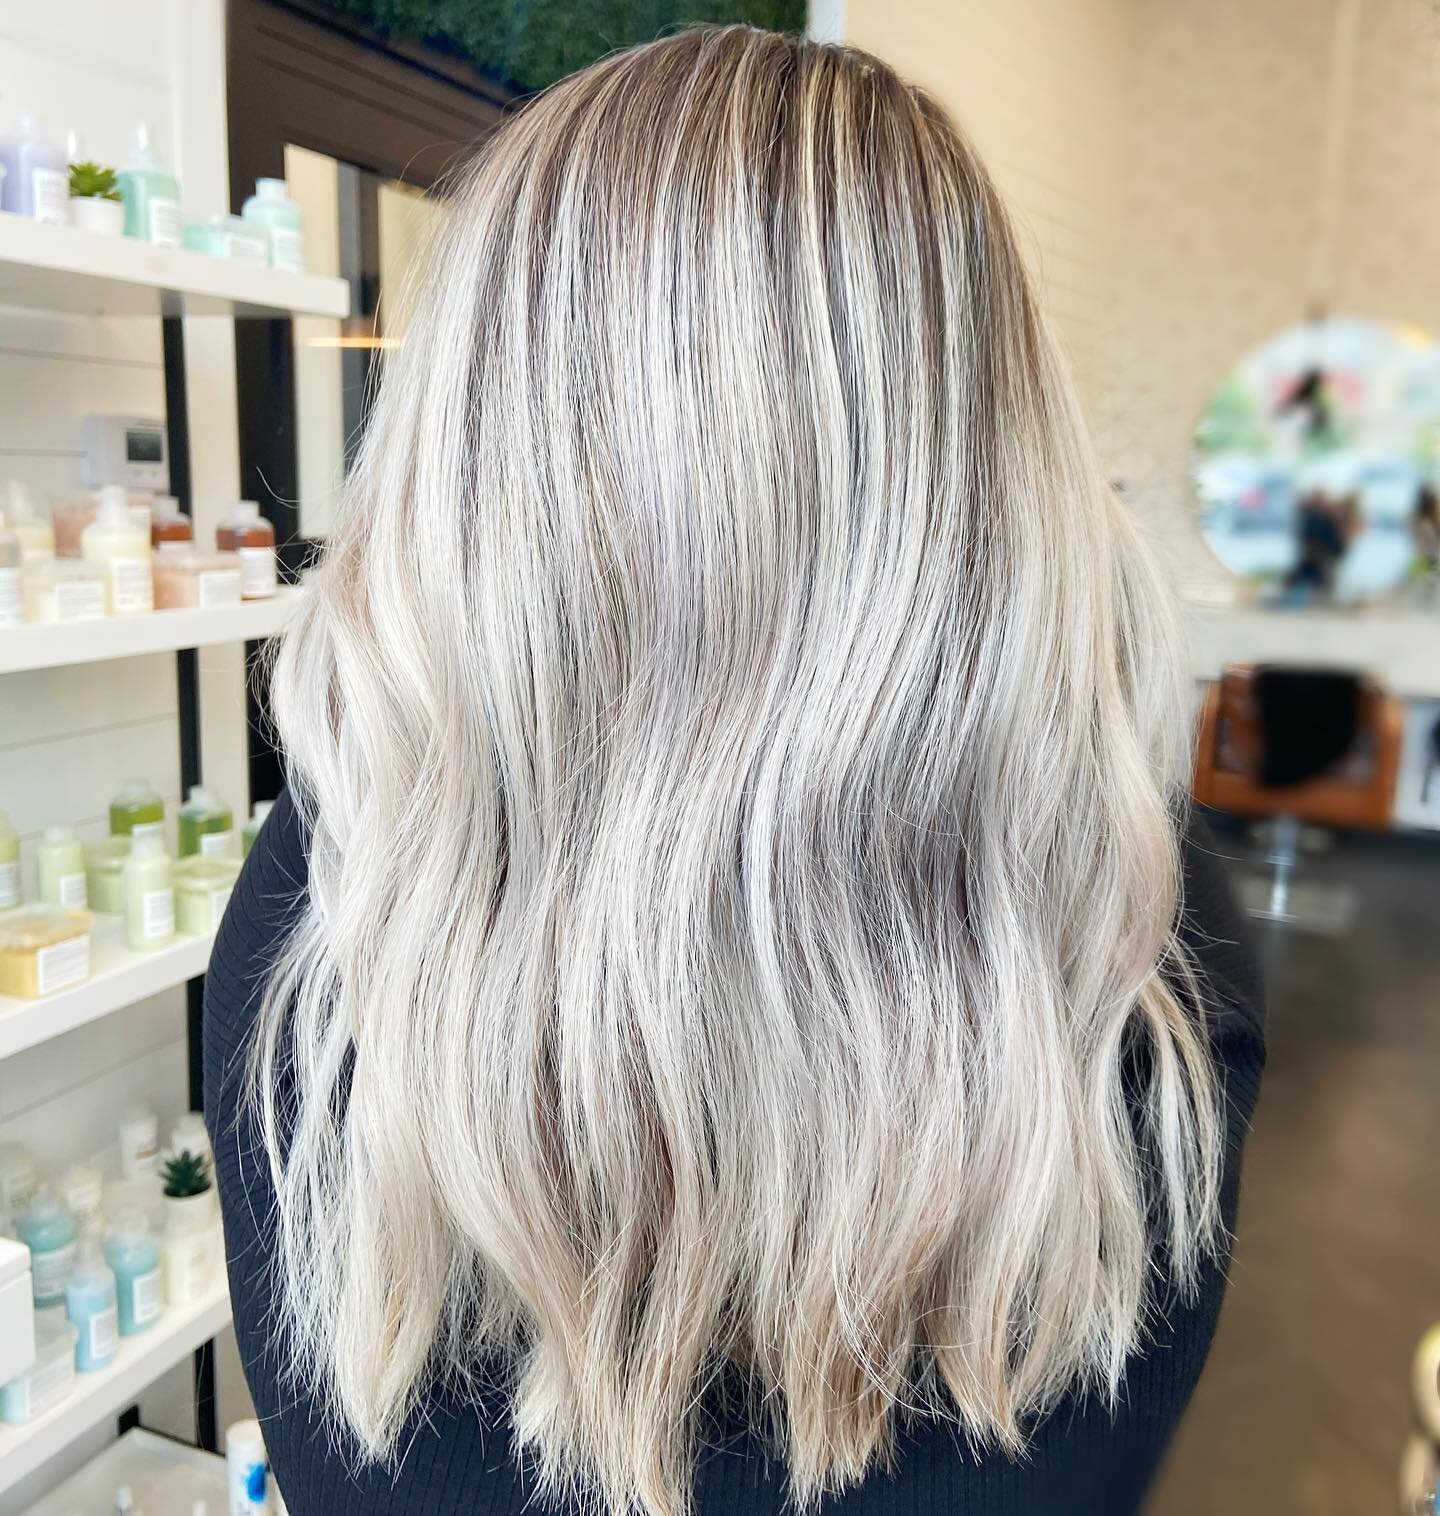 The closer we get to being who we were meant to be the brighter we shine ✨⠀
⠀
⠀
⠀
Hair by @erin_blendhairlounge 
⠀
⠀
⠀
⠀
#behindthechair #modersalon #americansalon #beautylaunchpad #bestofbalayage #mastersofbalayage #citiesbesthairartists #balayagear